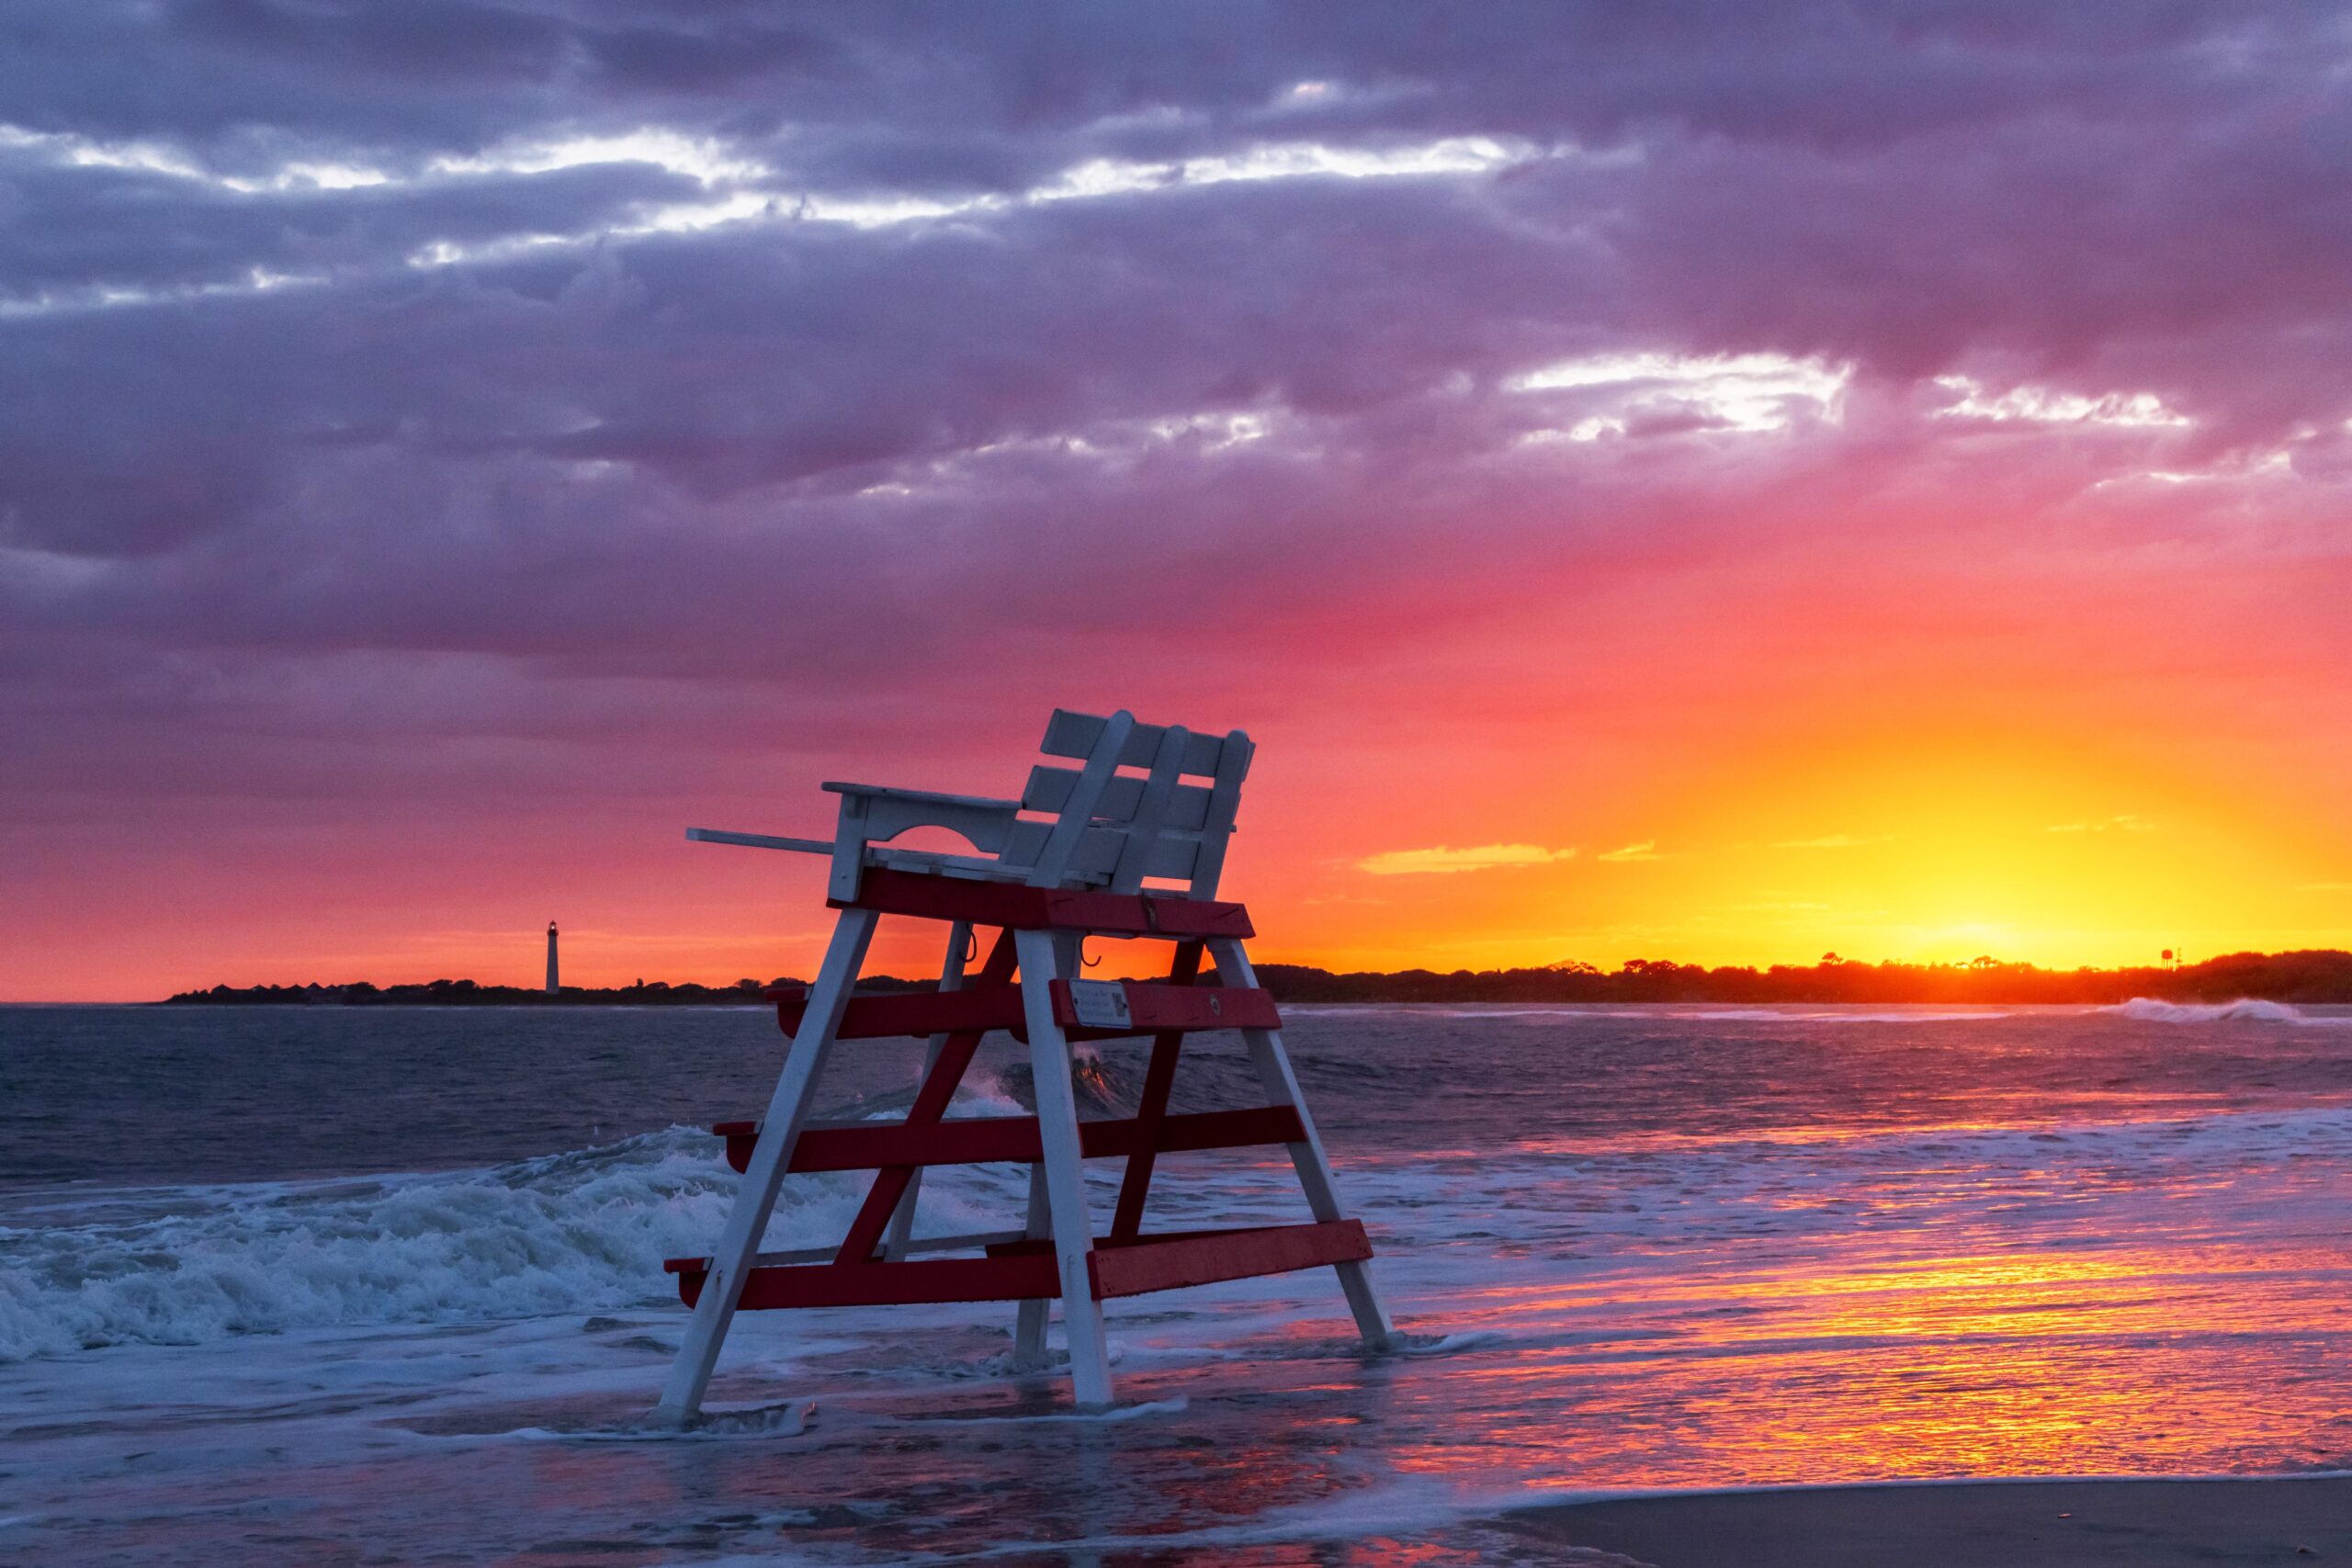 The ocean rushing into the beach at sunset with brilliant yellow, orange, pink, and purple clouds in the sky. The lifeguard stand is at the ocean's edge, and the Cape May lighthouse is in the distance.